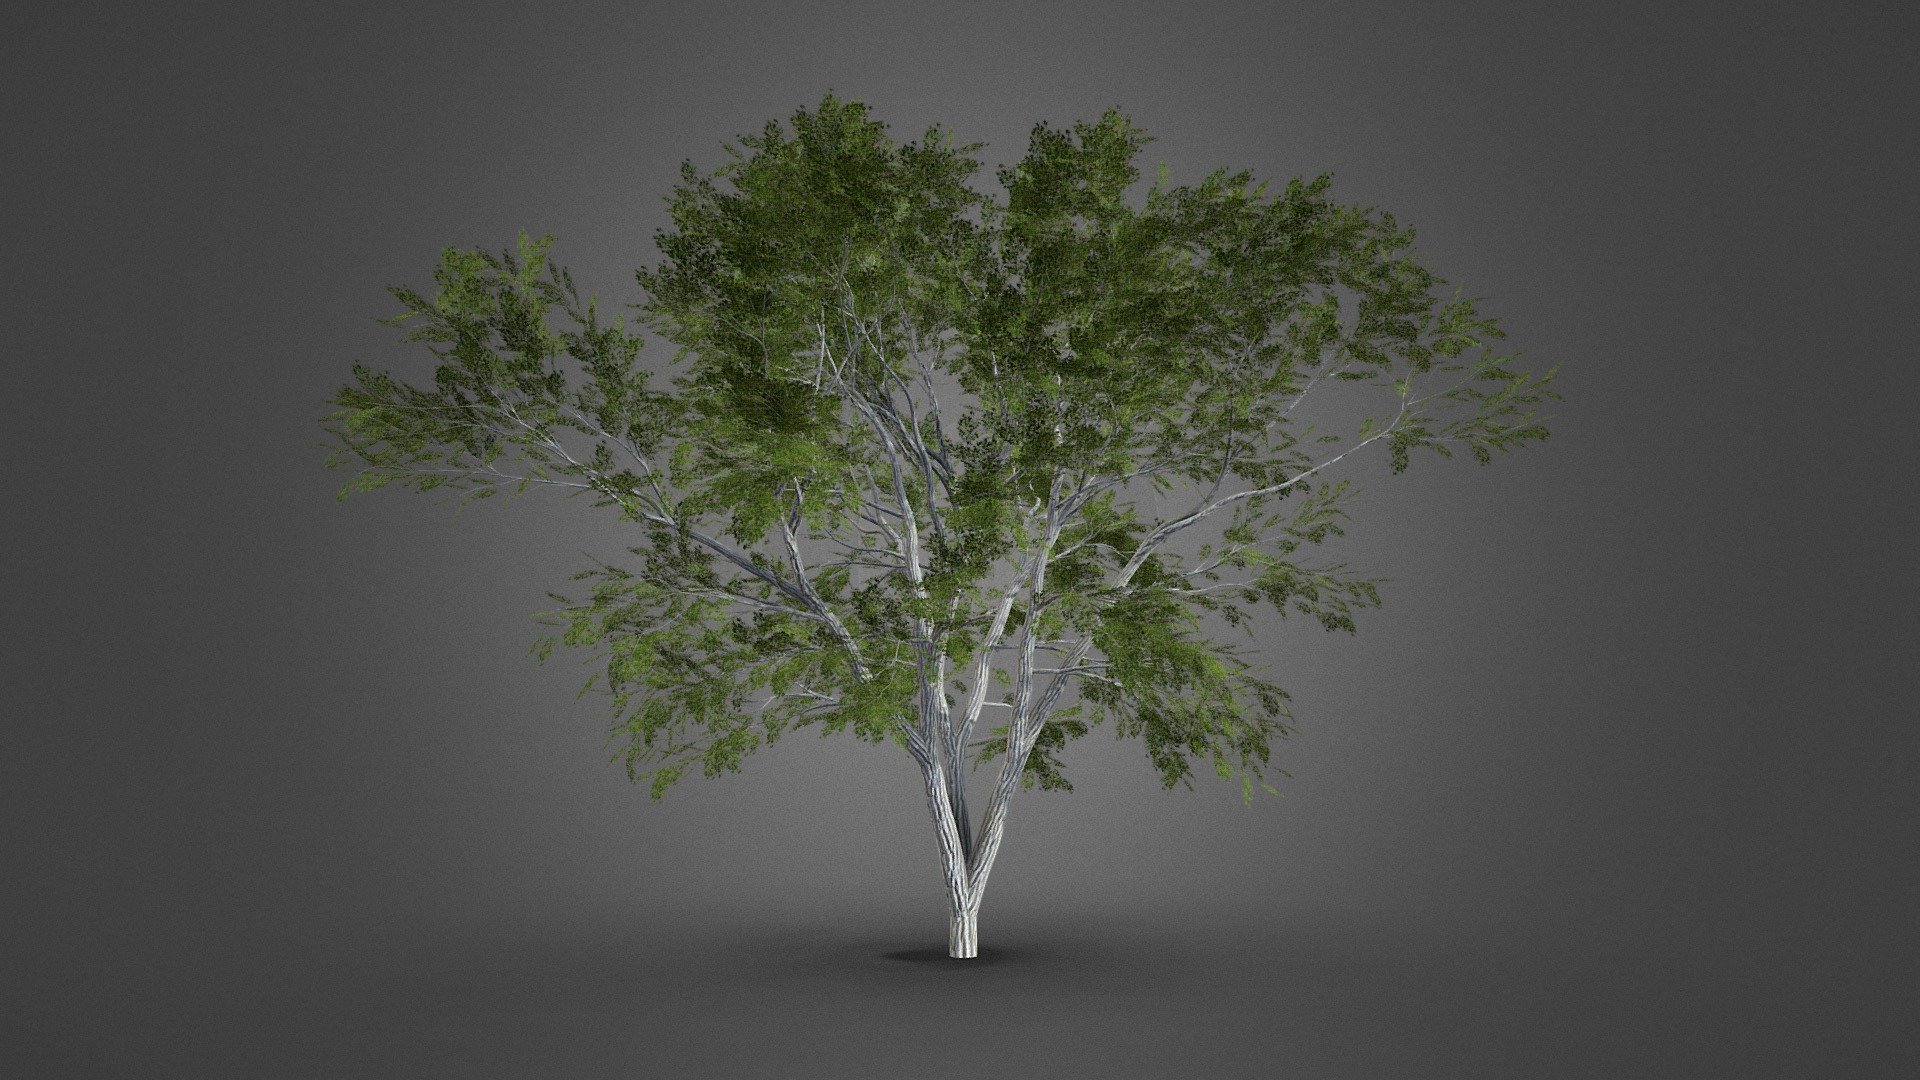 This model is made with blender. It is free to download, you can use it in your projects 3d model